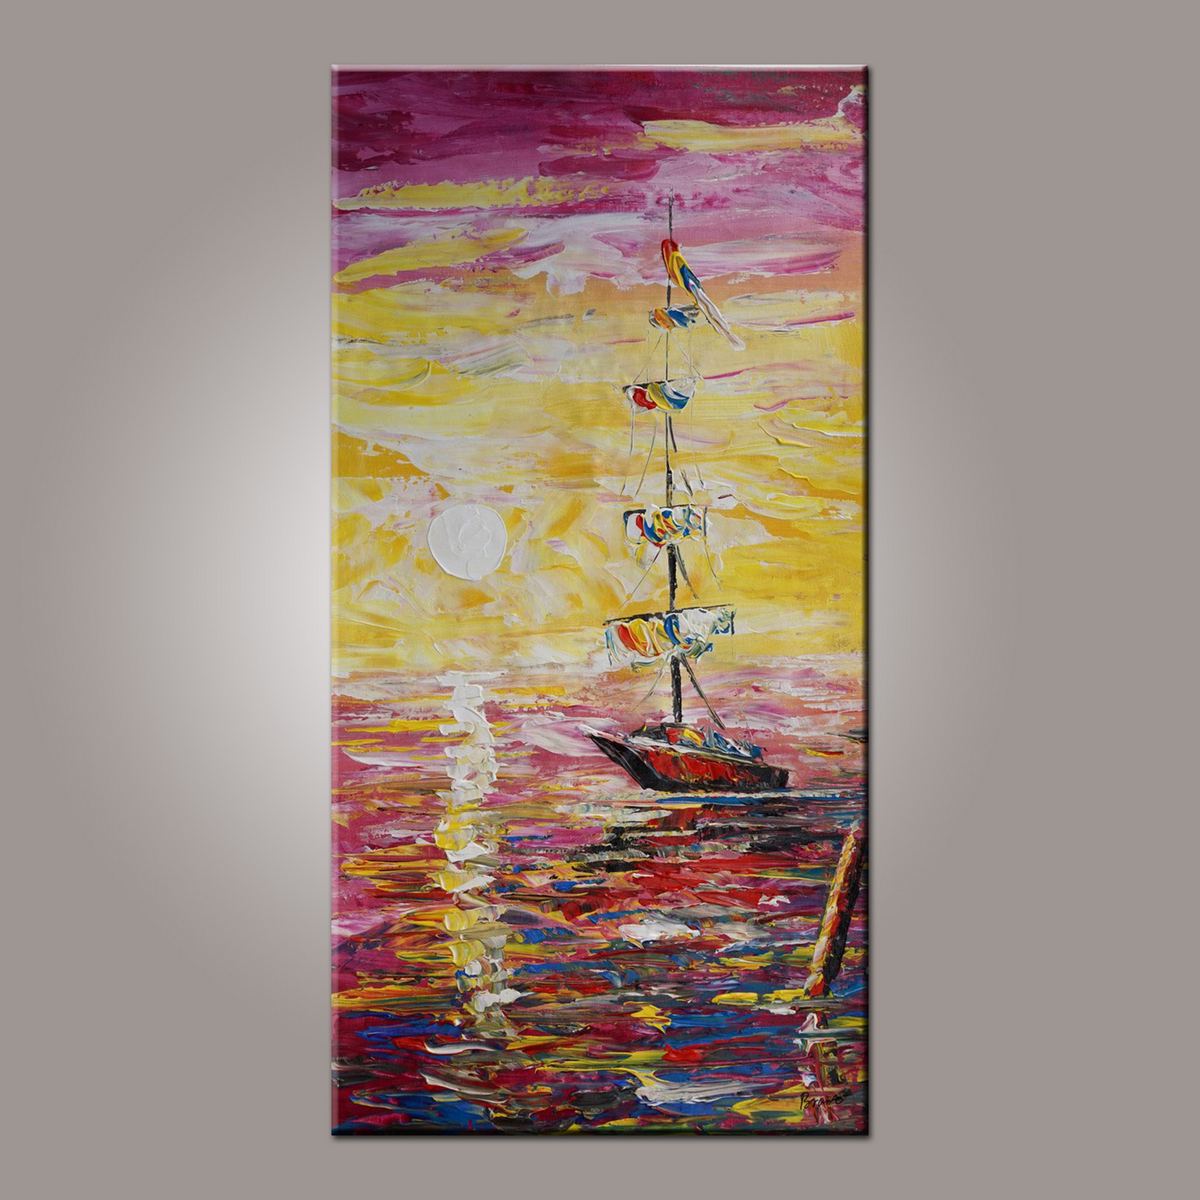 Wall Art, Boat Painting, Contemporary Art, Art on Canvas, Art Painting, Abstract Art, Living Room Wall Art, Canvas Art, Art for Sale-Paintingforhome